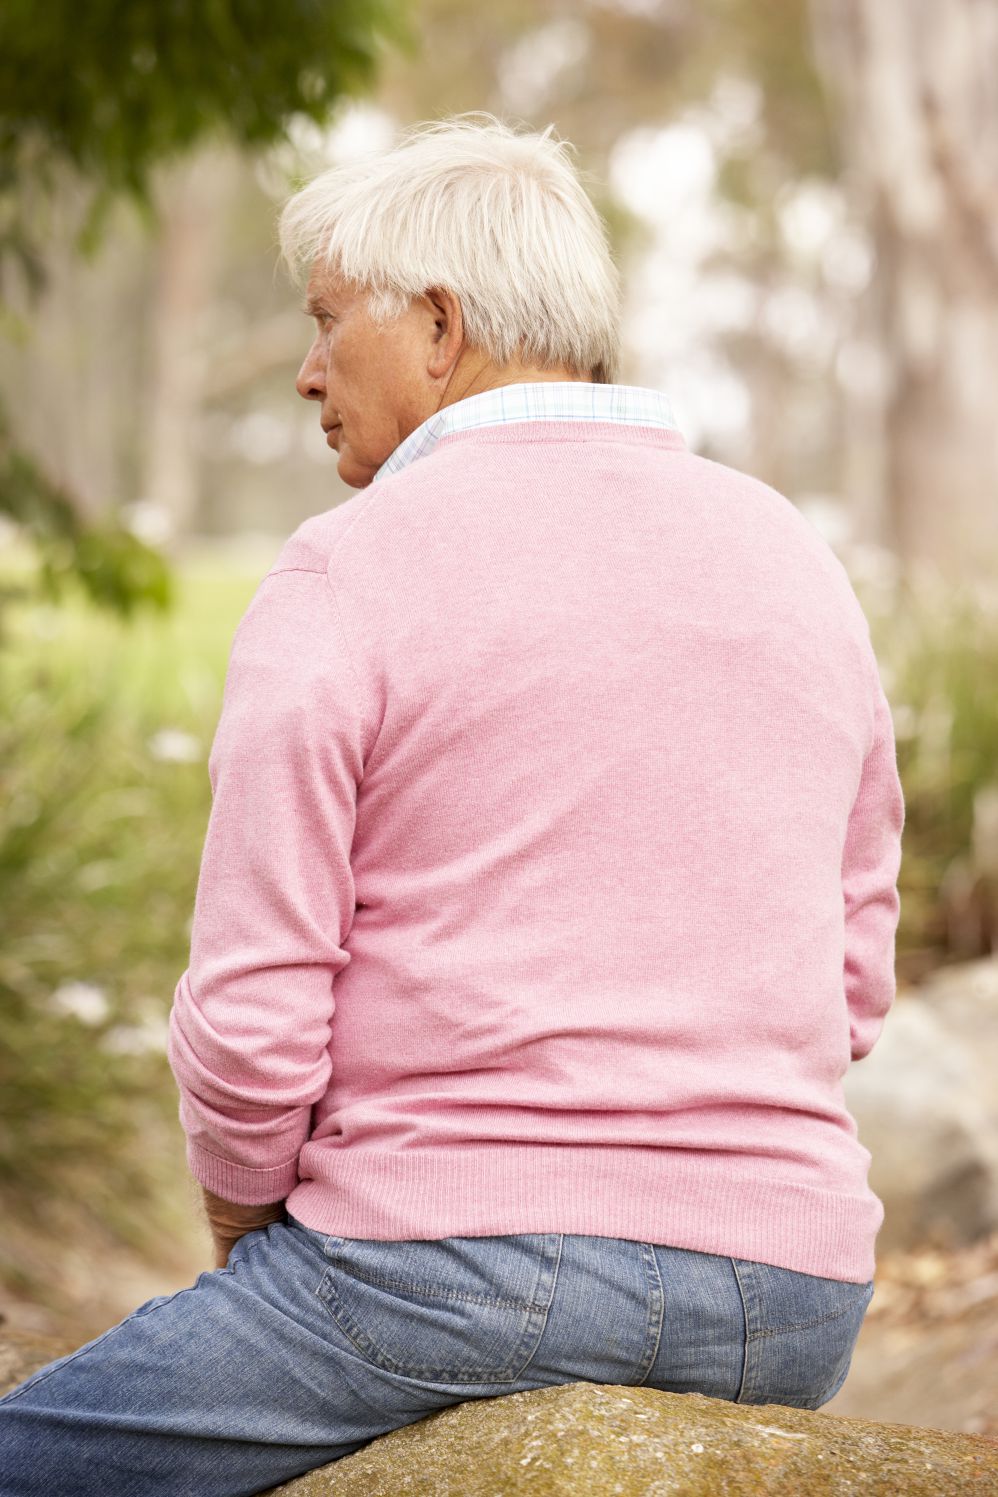 Elderly person in sweater and jeans sitting on rock, with back to camera.